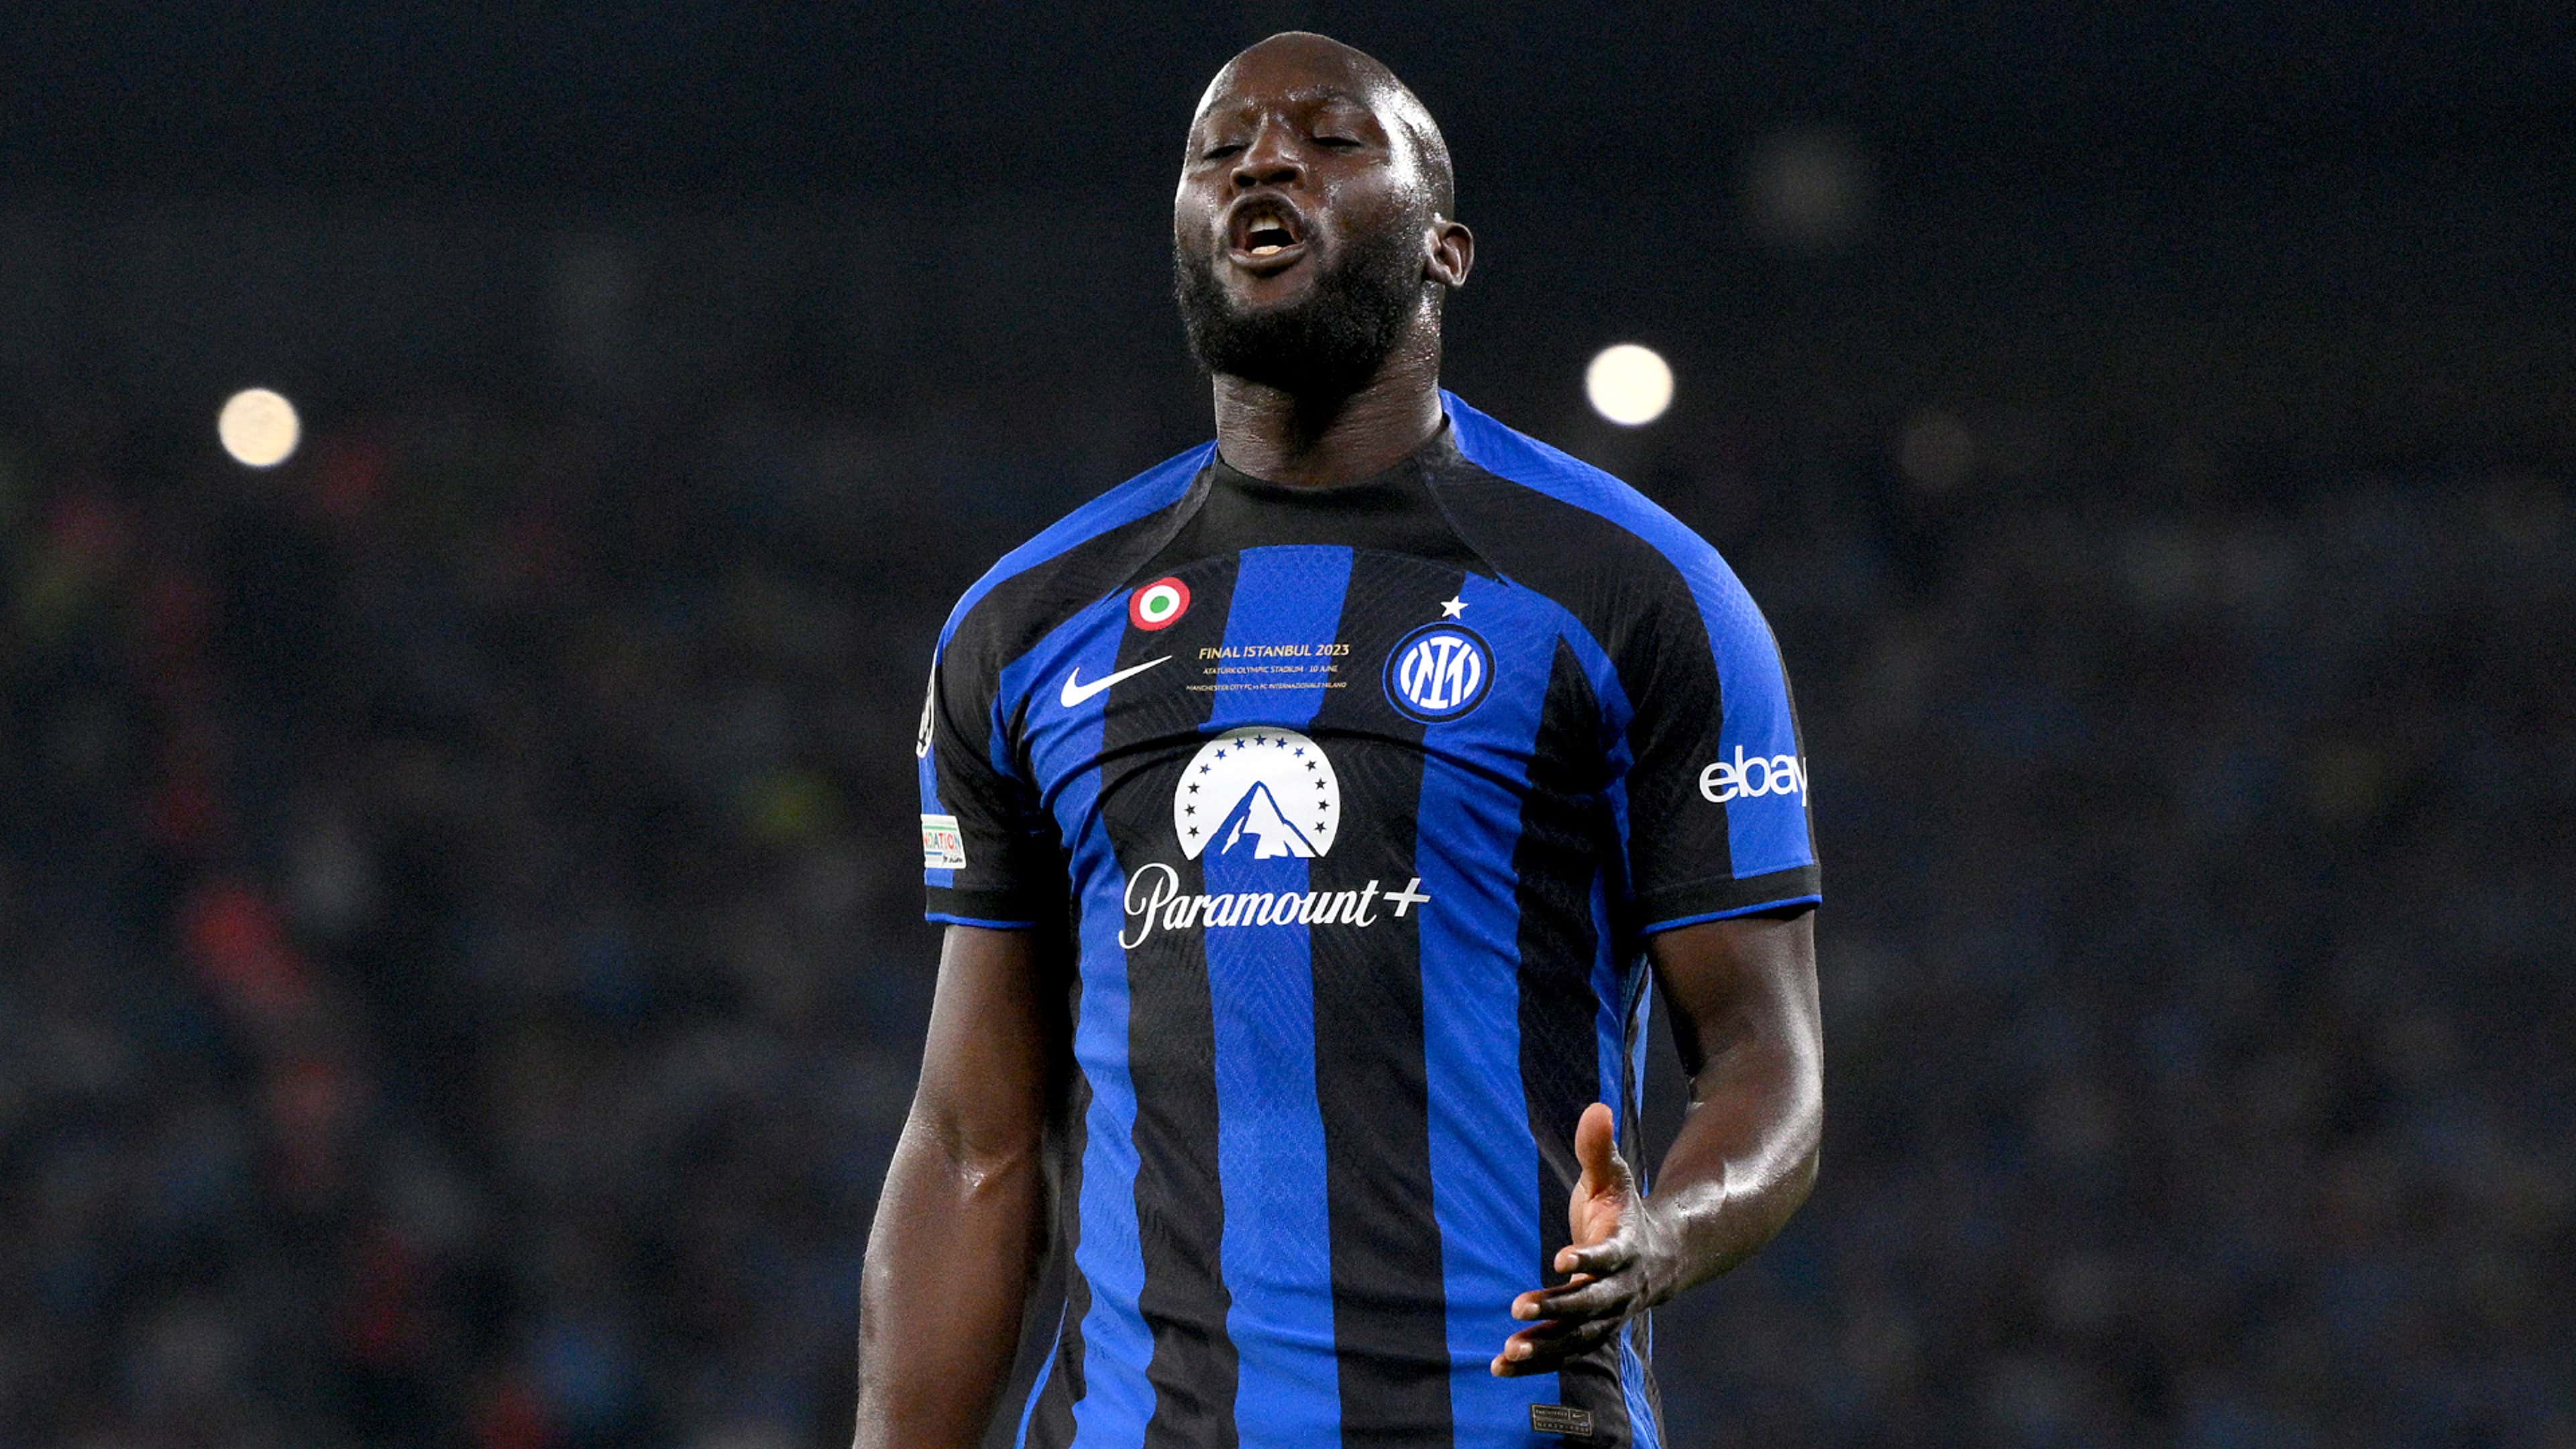 'Being neglected's the norm' - Romelu Lukaku appears to air frustration ...